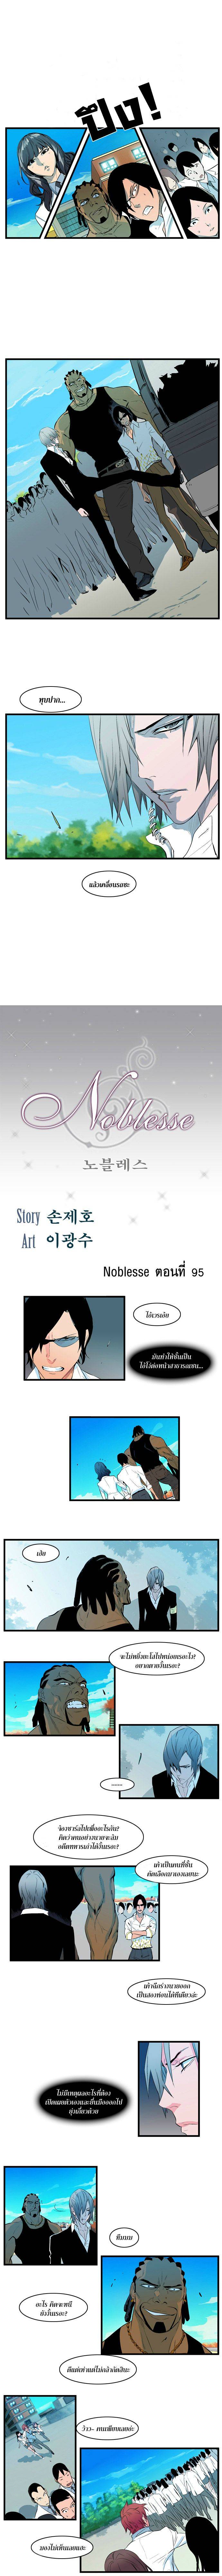 Noblesse 95 002